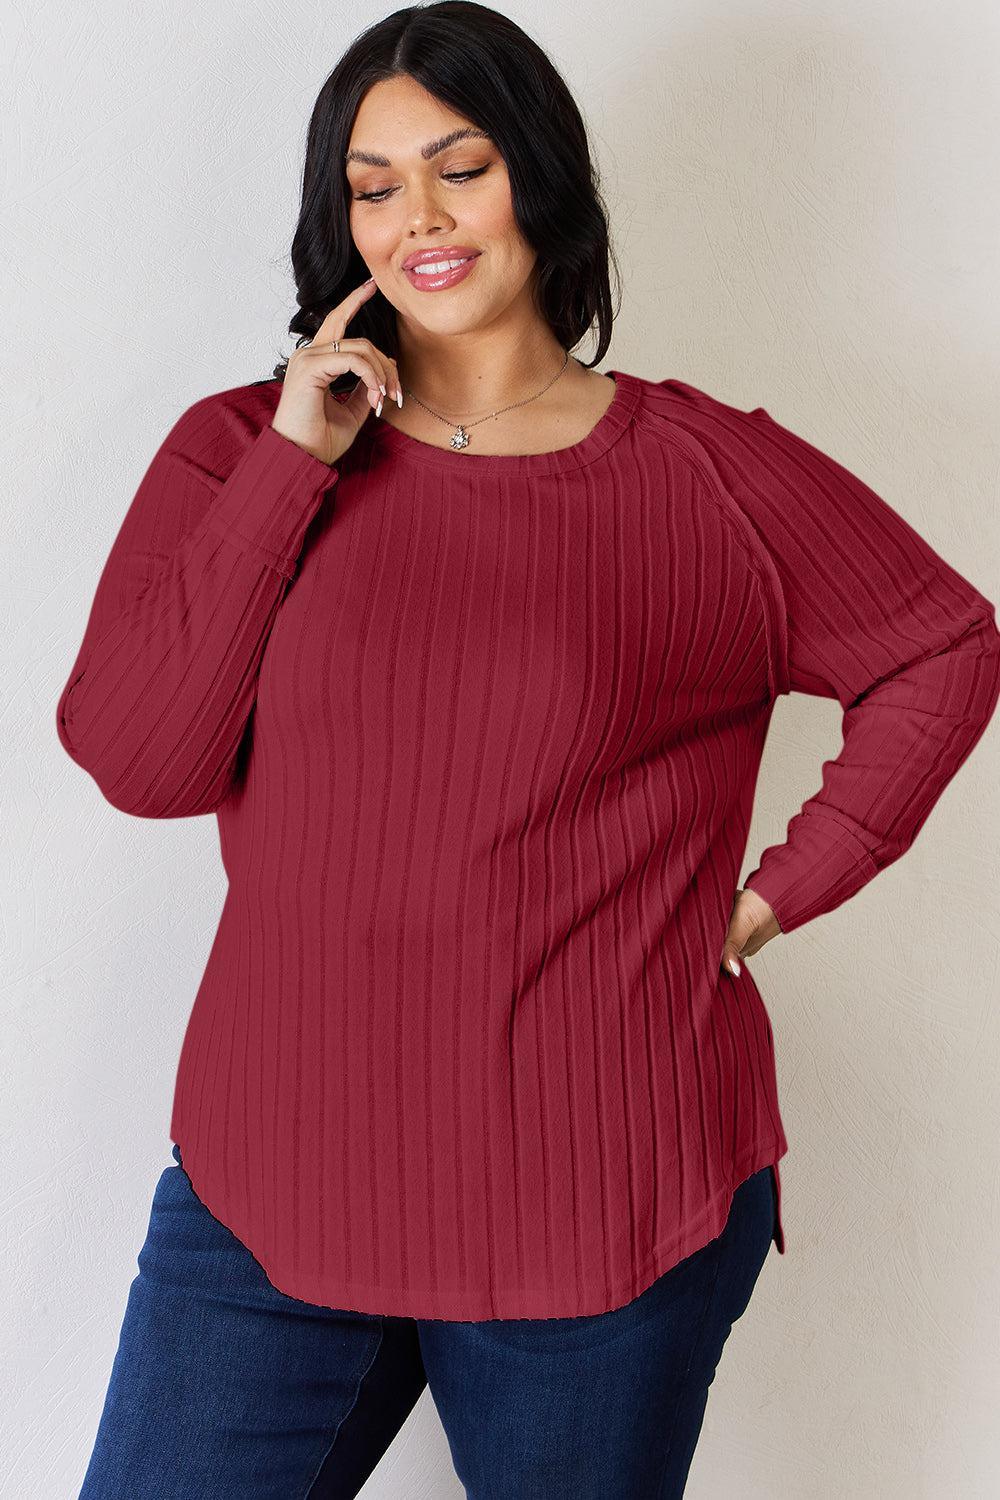 a woman in a red sweater is talking on a cell phone